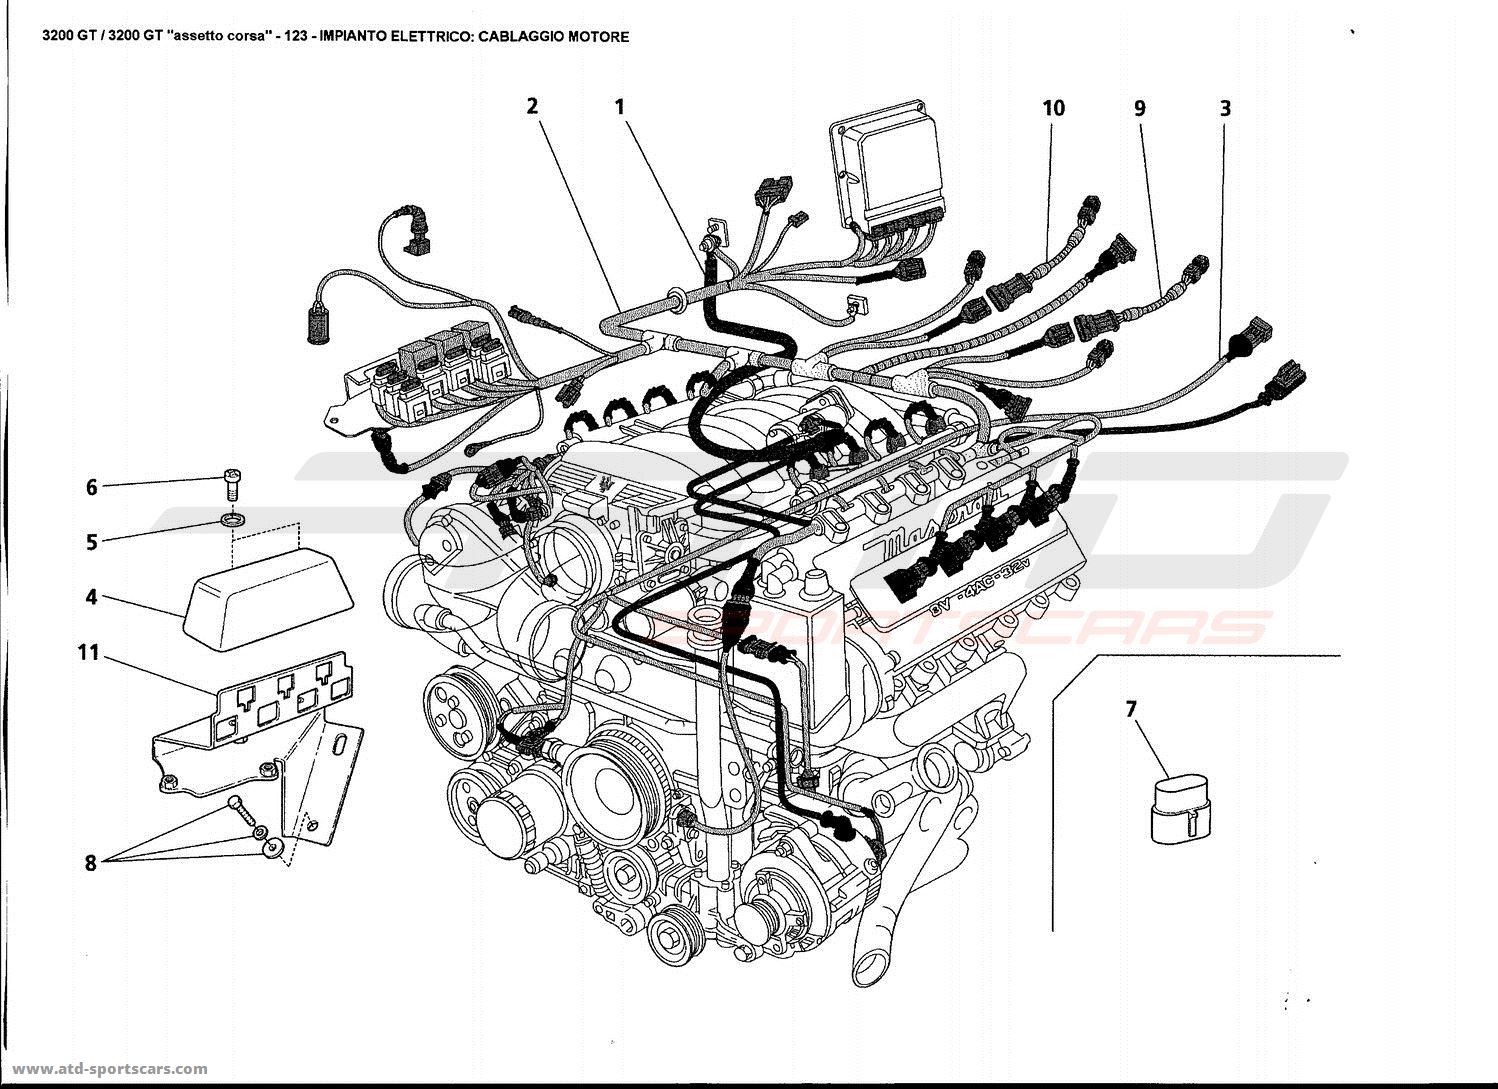 ELECTRICAL SYSTEM: ENGINE HARNESS